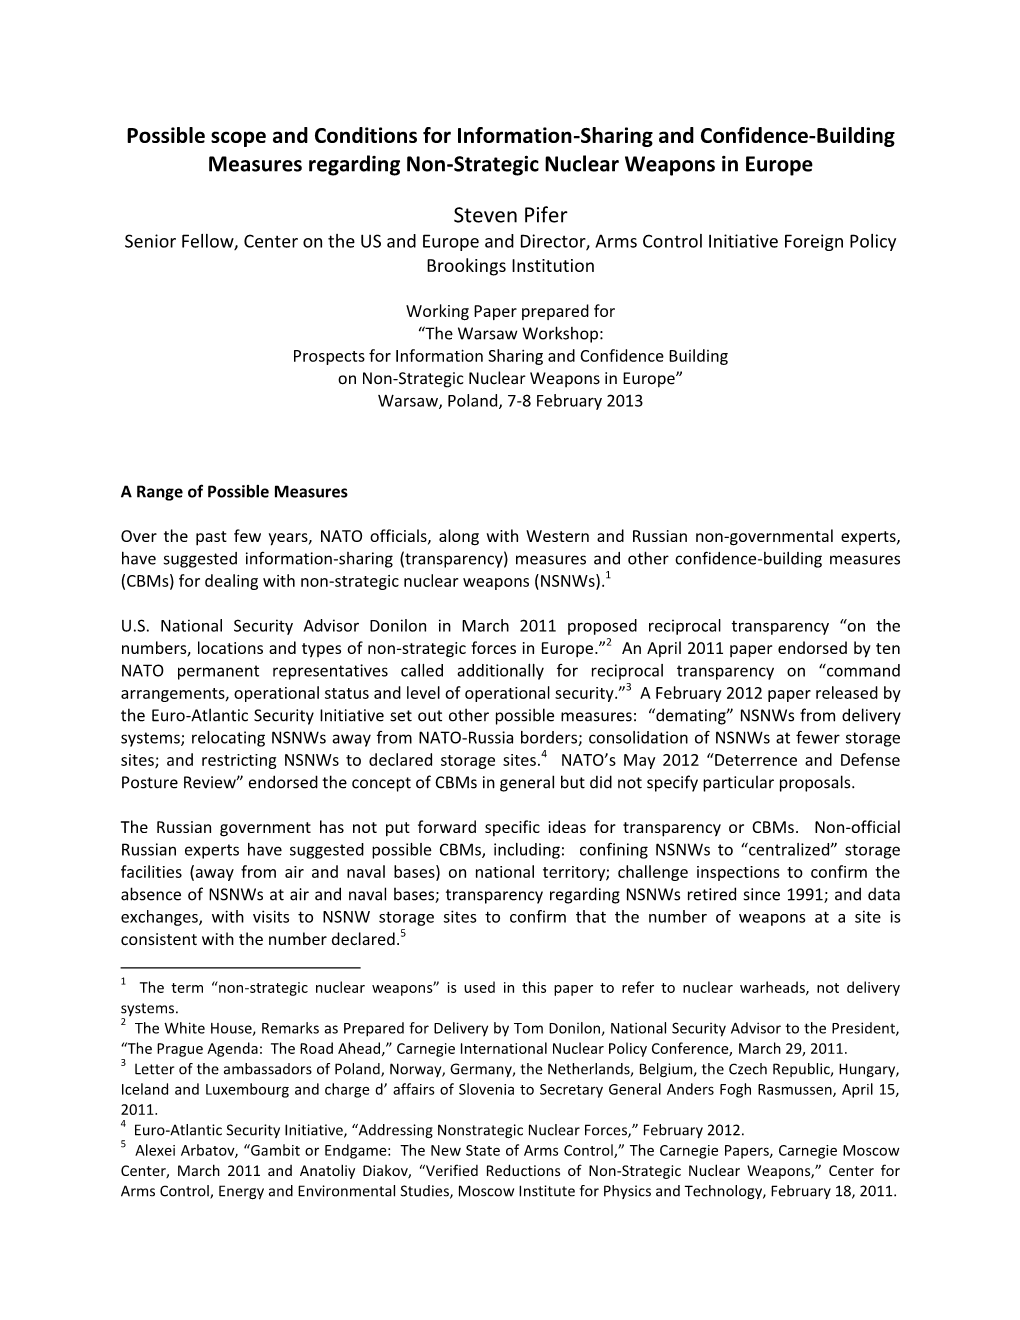 Possible Scope and Conditions for Information-Sharing and Confidence-Building Measures Regarding Non-Strategic Nuclear Weapons in Europe